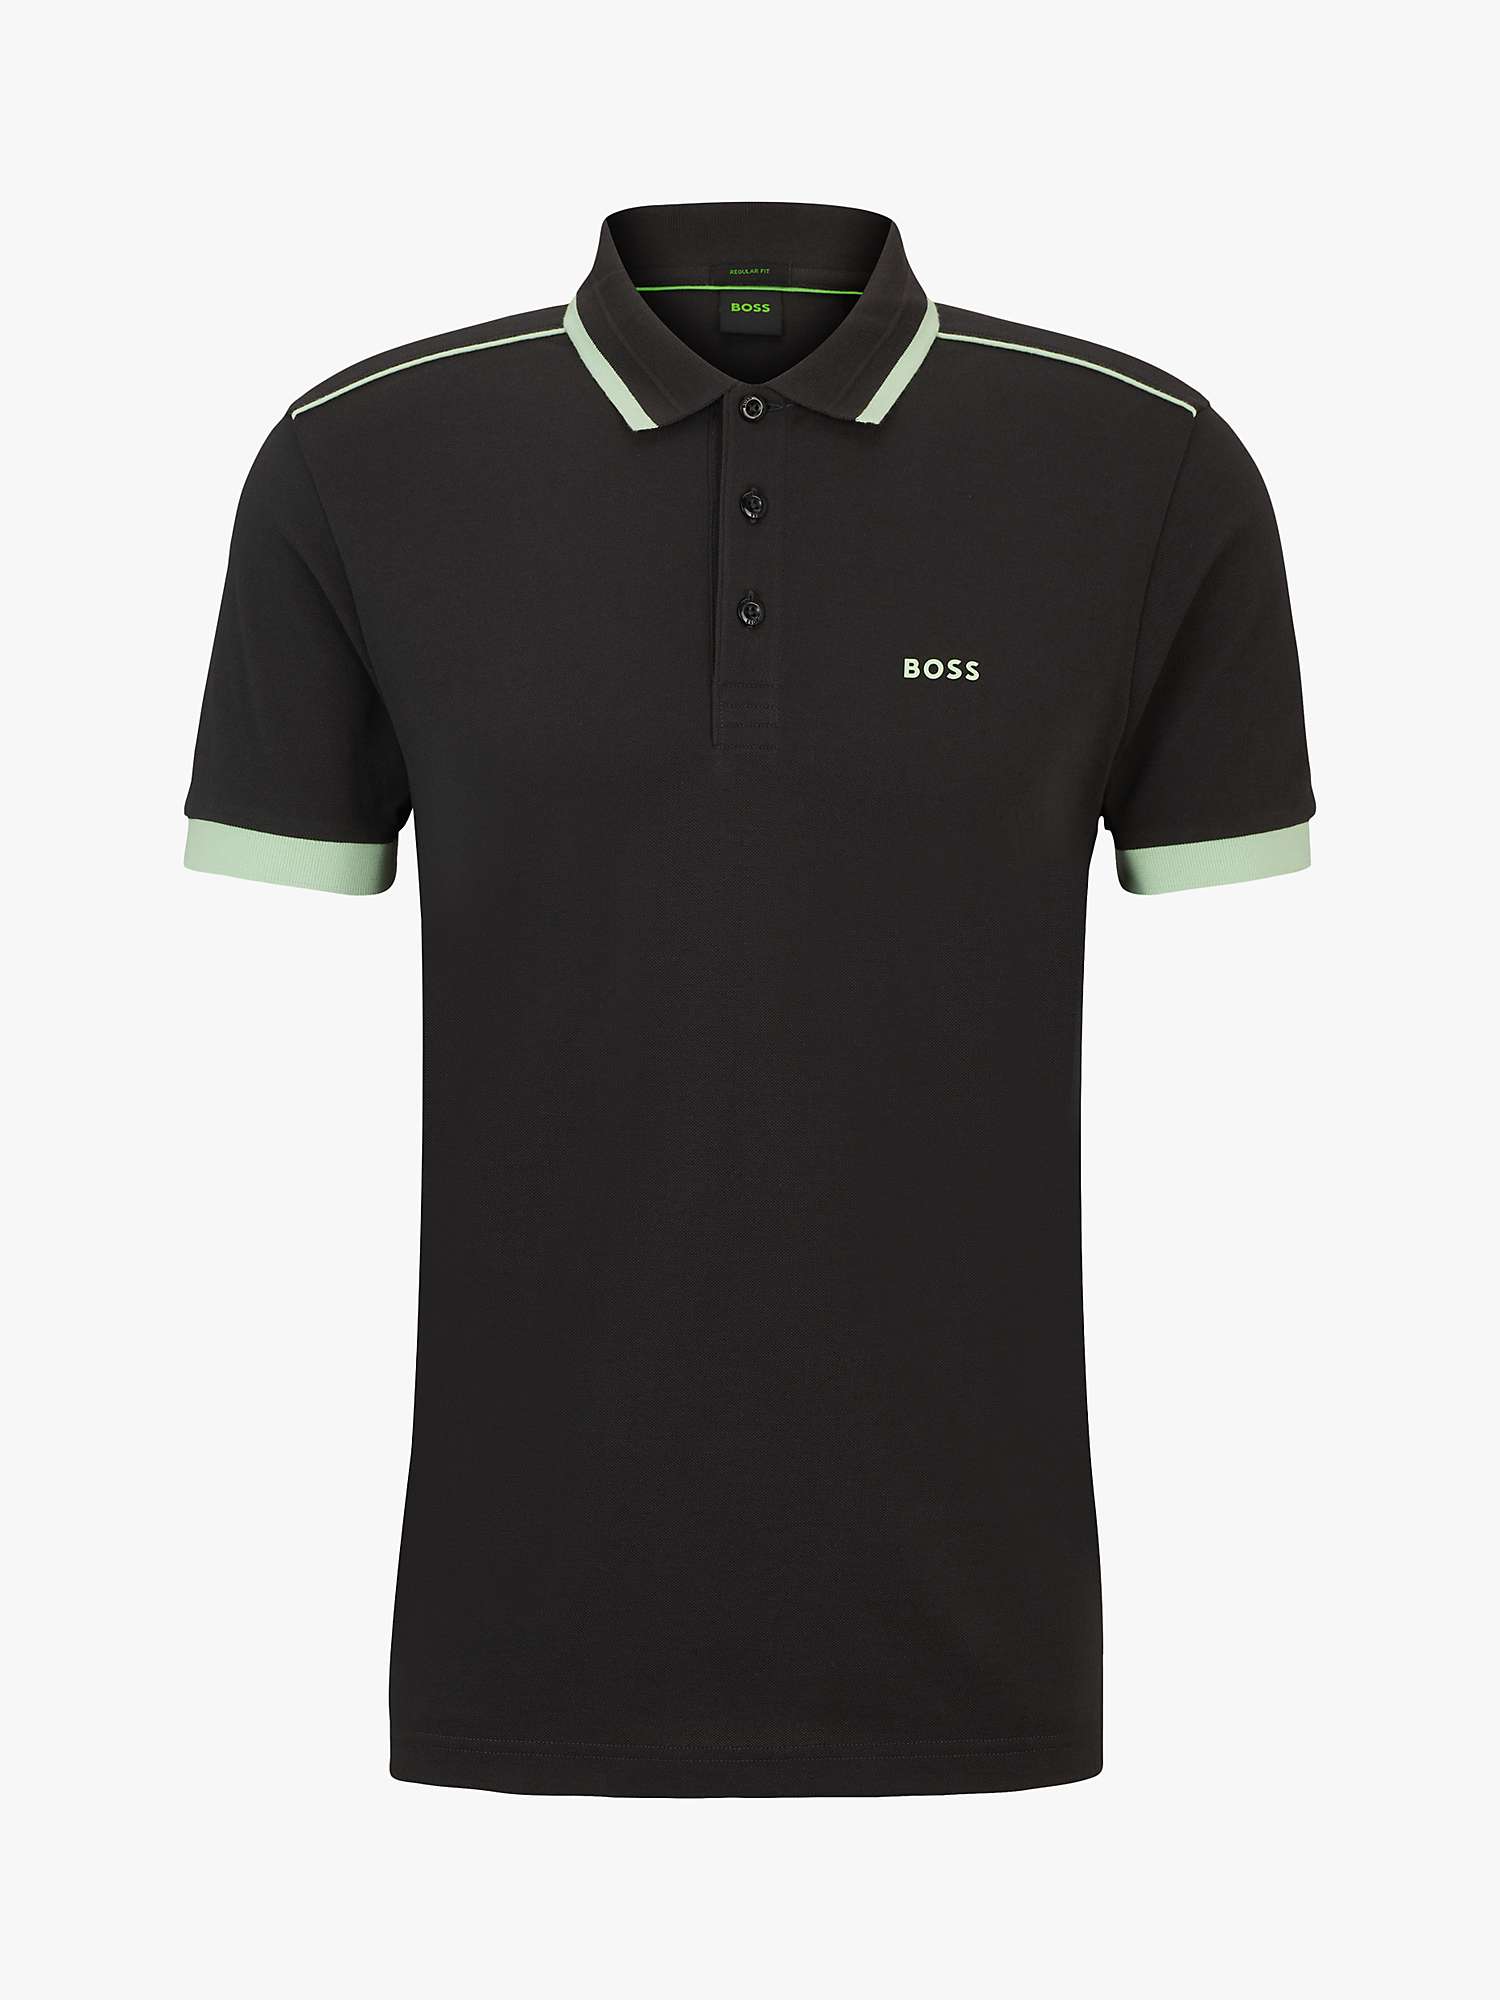 Buy BOSS Paddy 016 Short Sleeve Polo Shirt, Charcoal Online at johnlewis.com